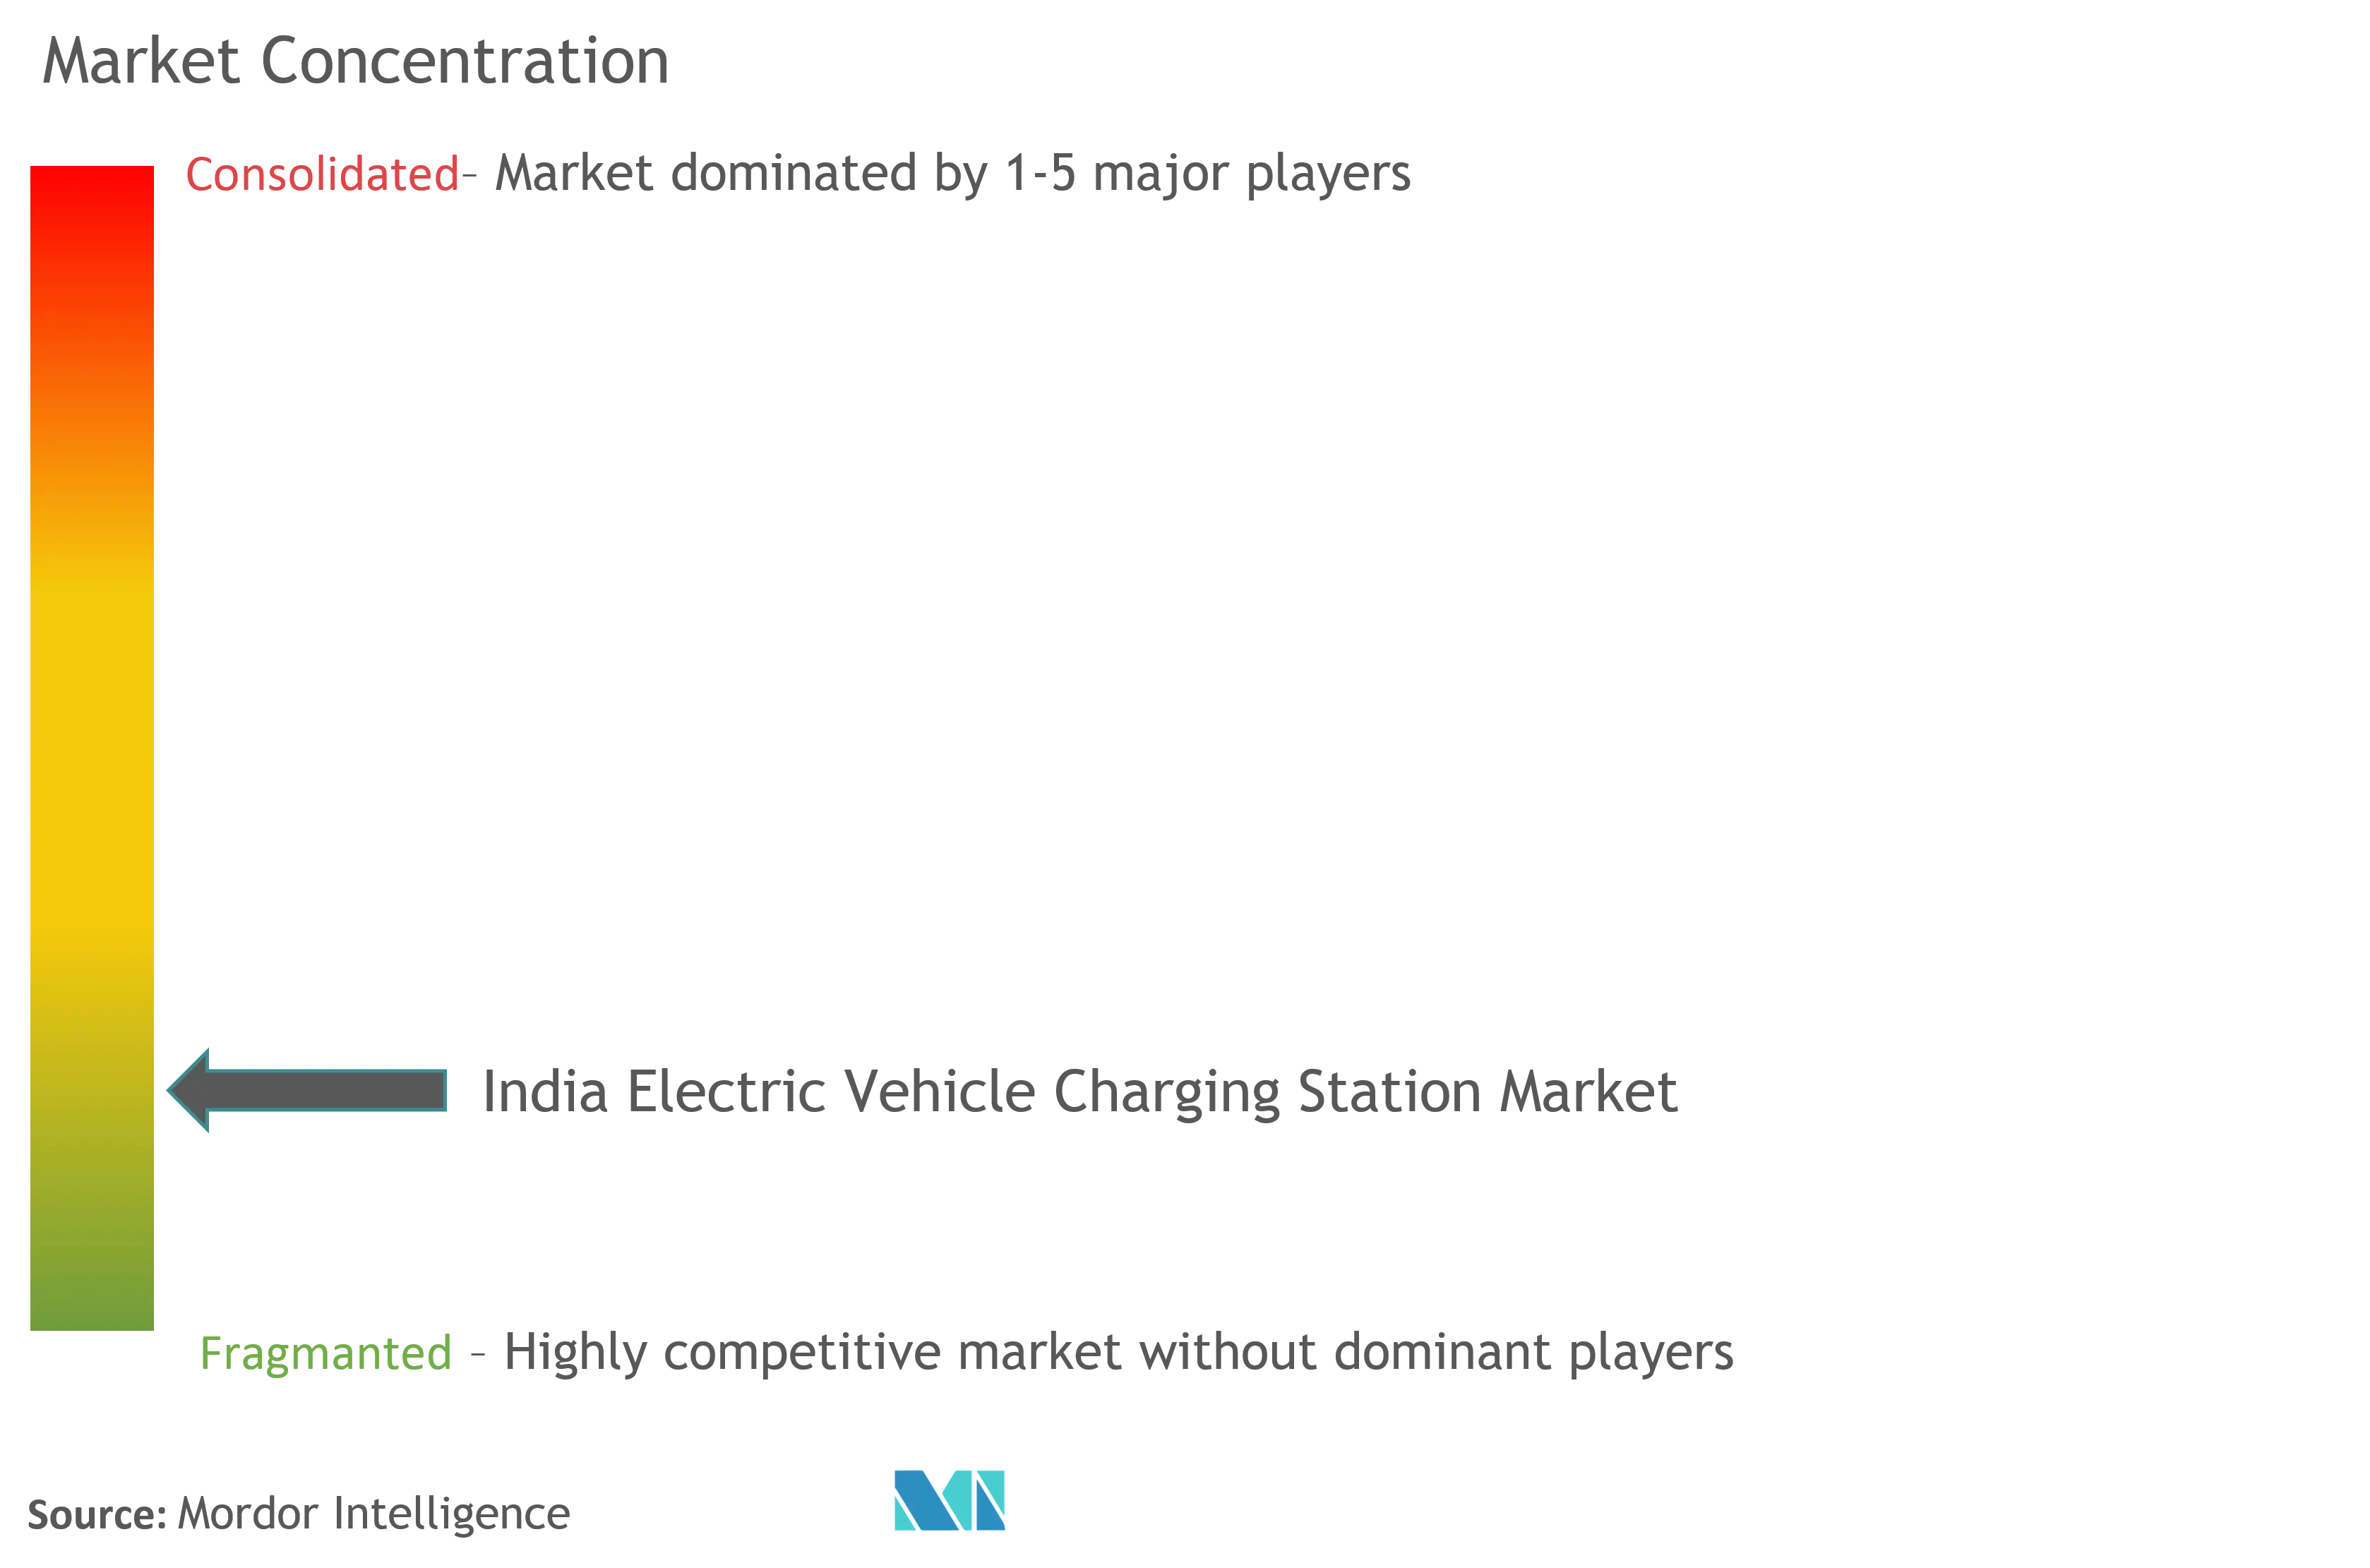 India Electric Vehicle Charging Station Market Concentration